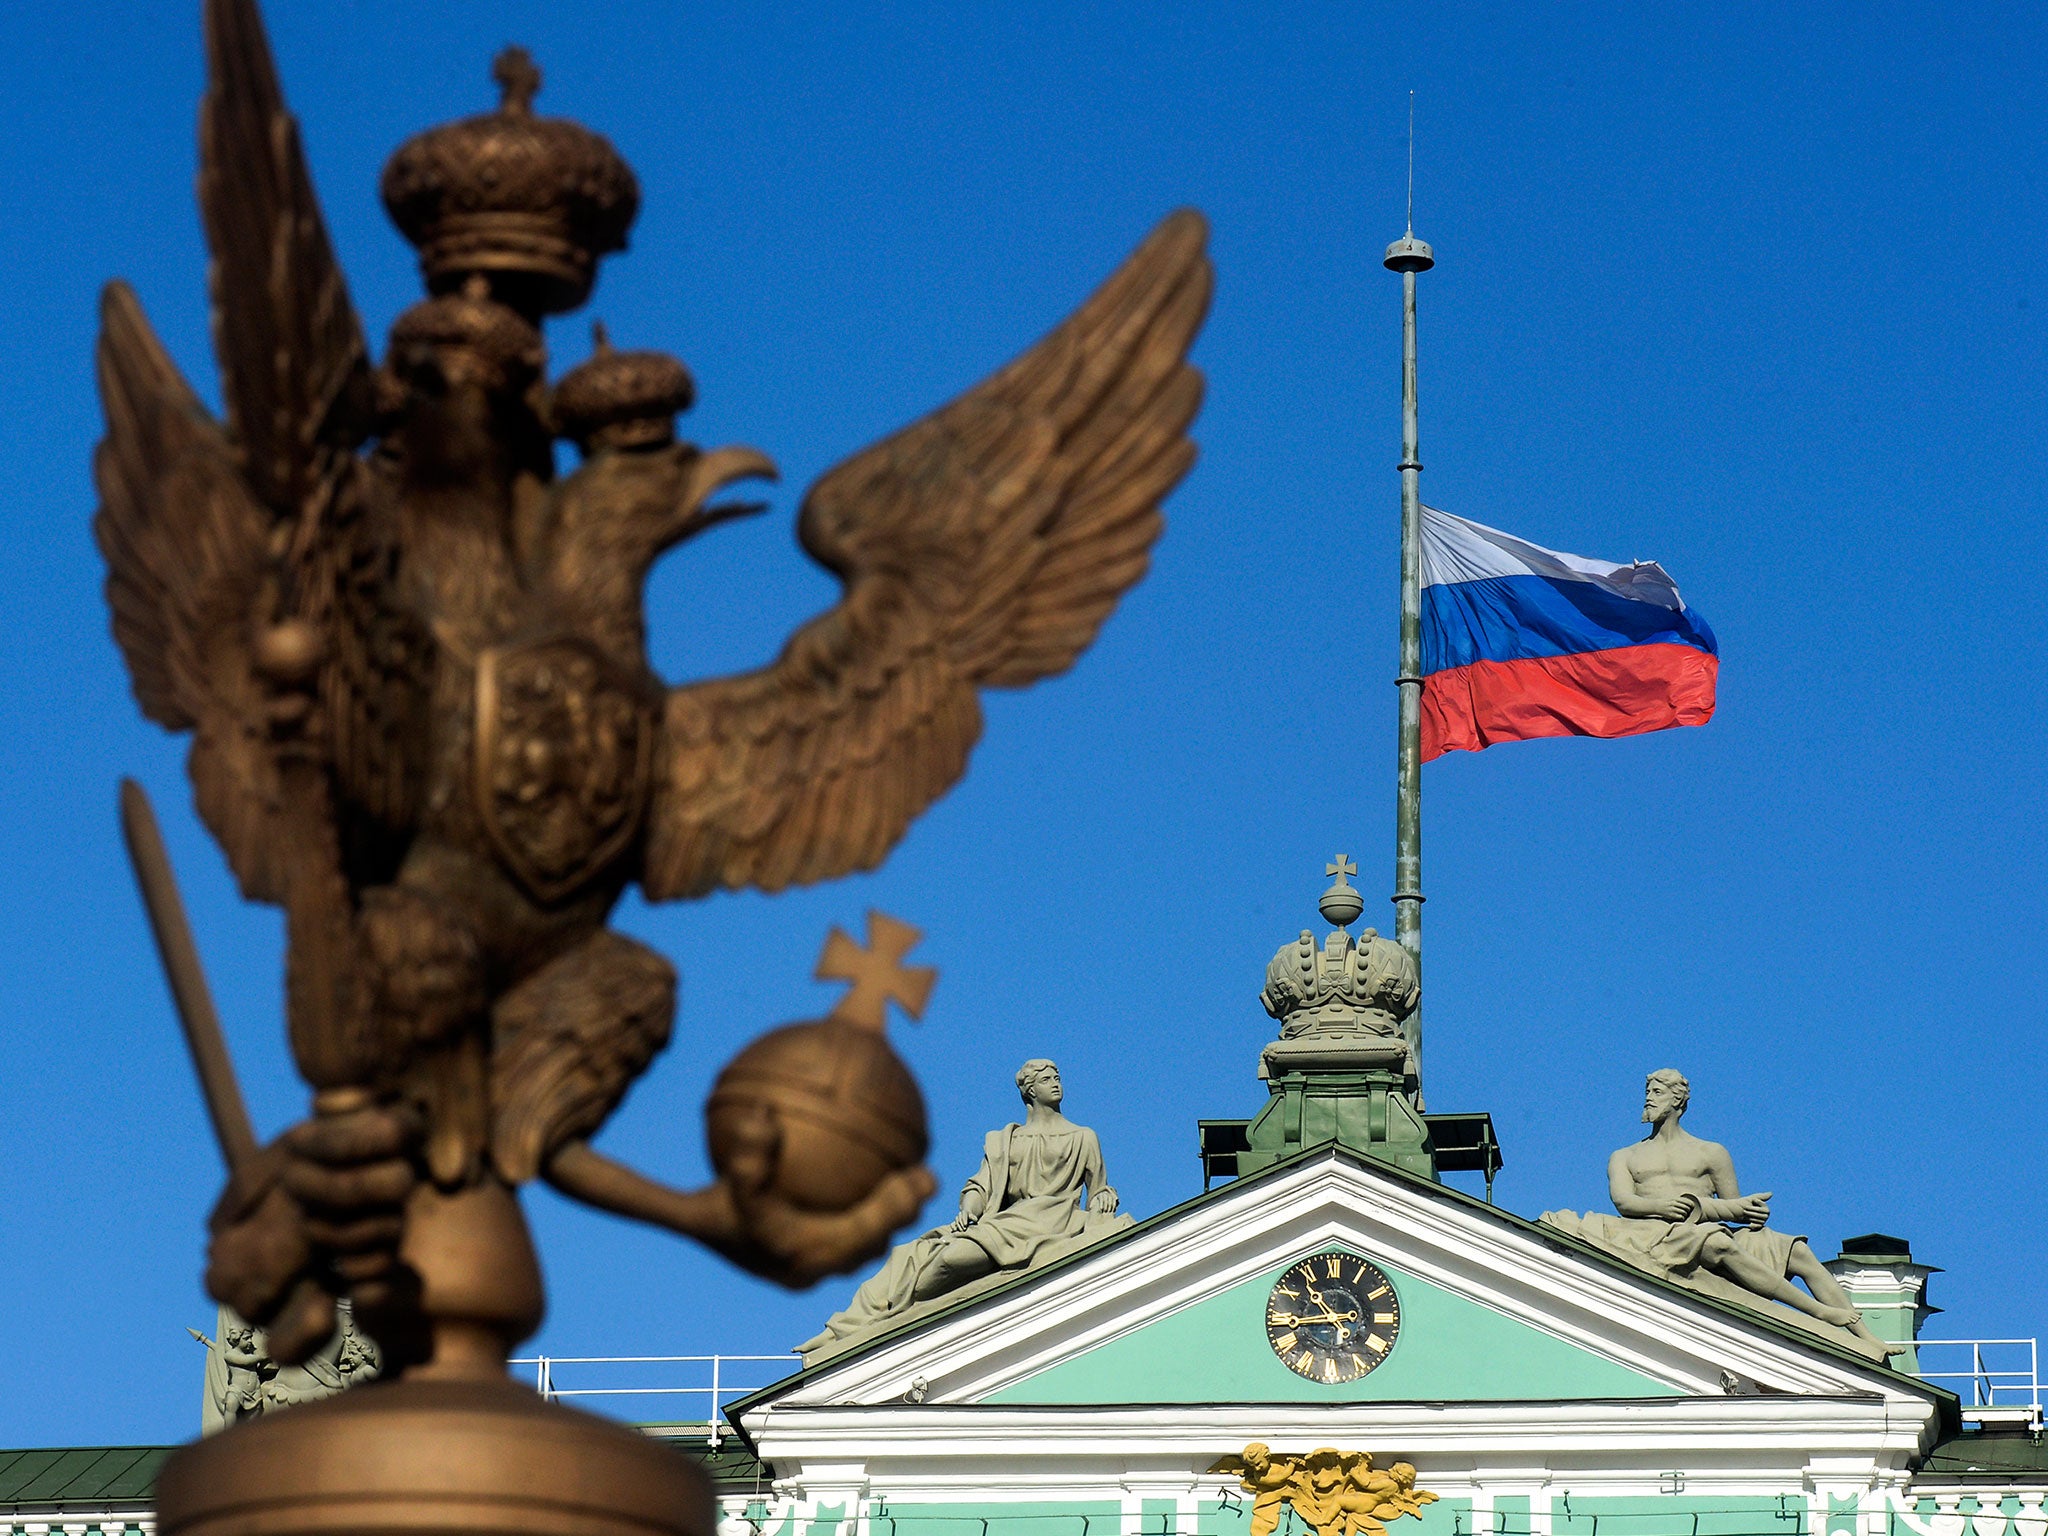 The Russian flag flies at half-mast over the State Hermitage Museum on Dvortsovaya Square in Saint Petersburg